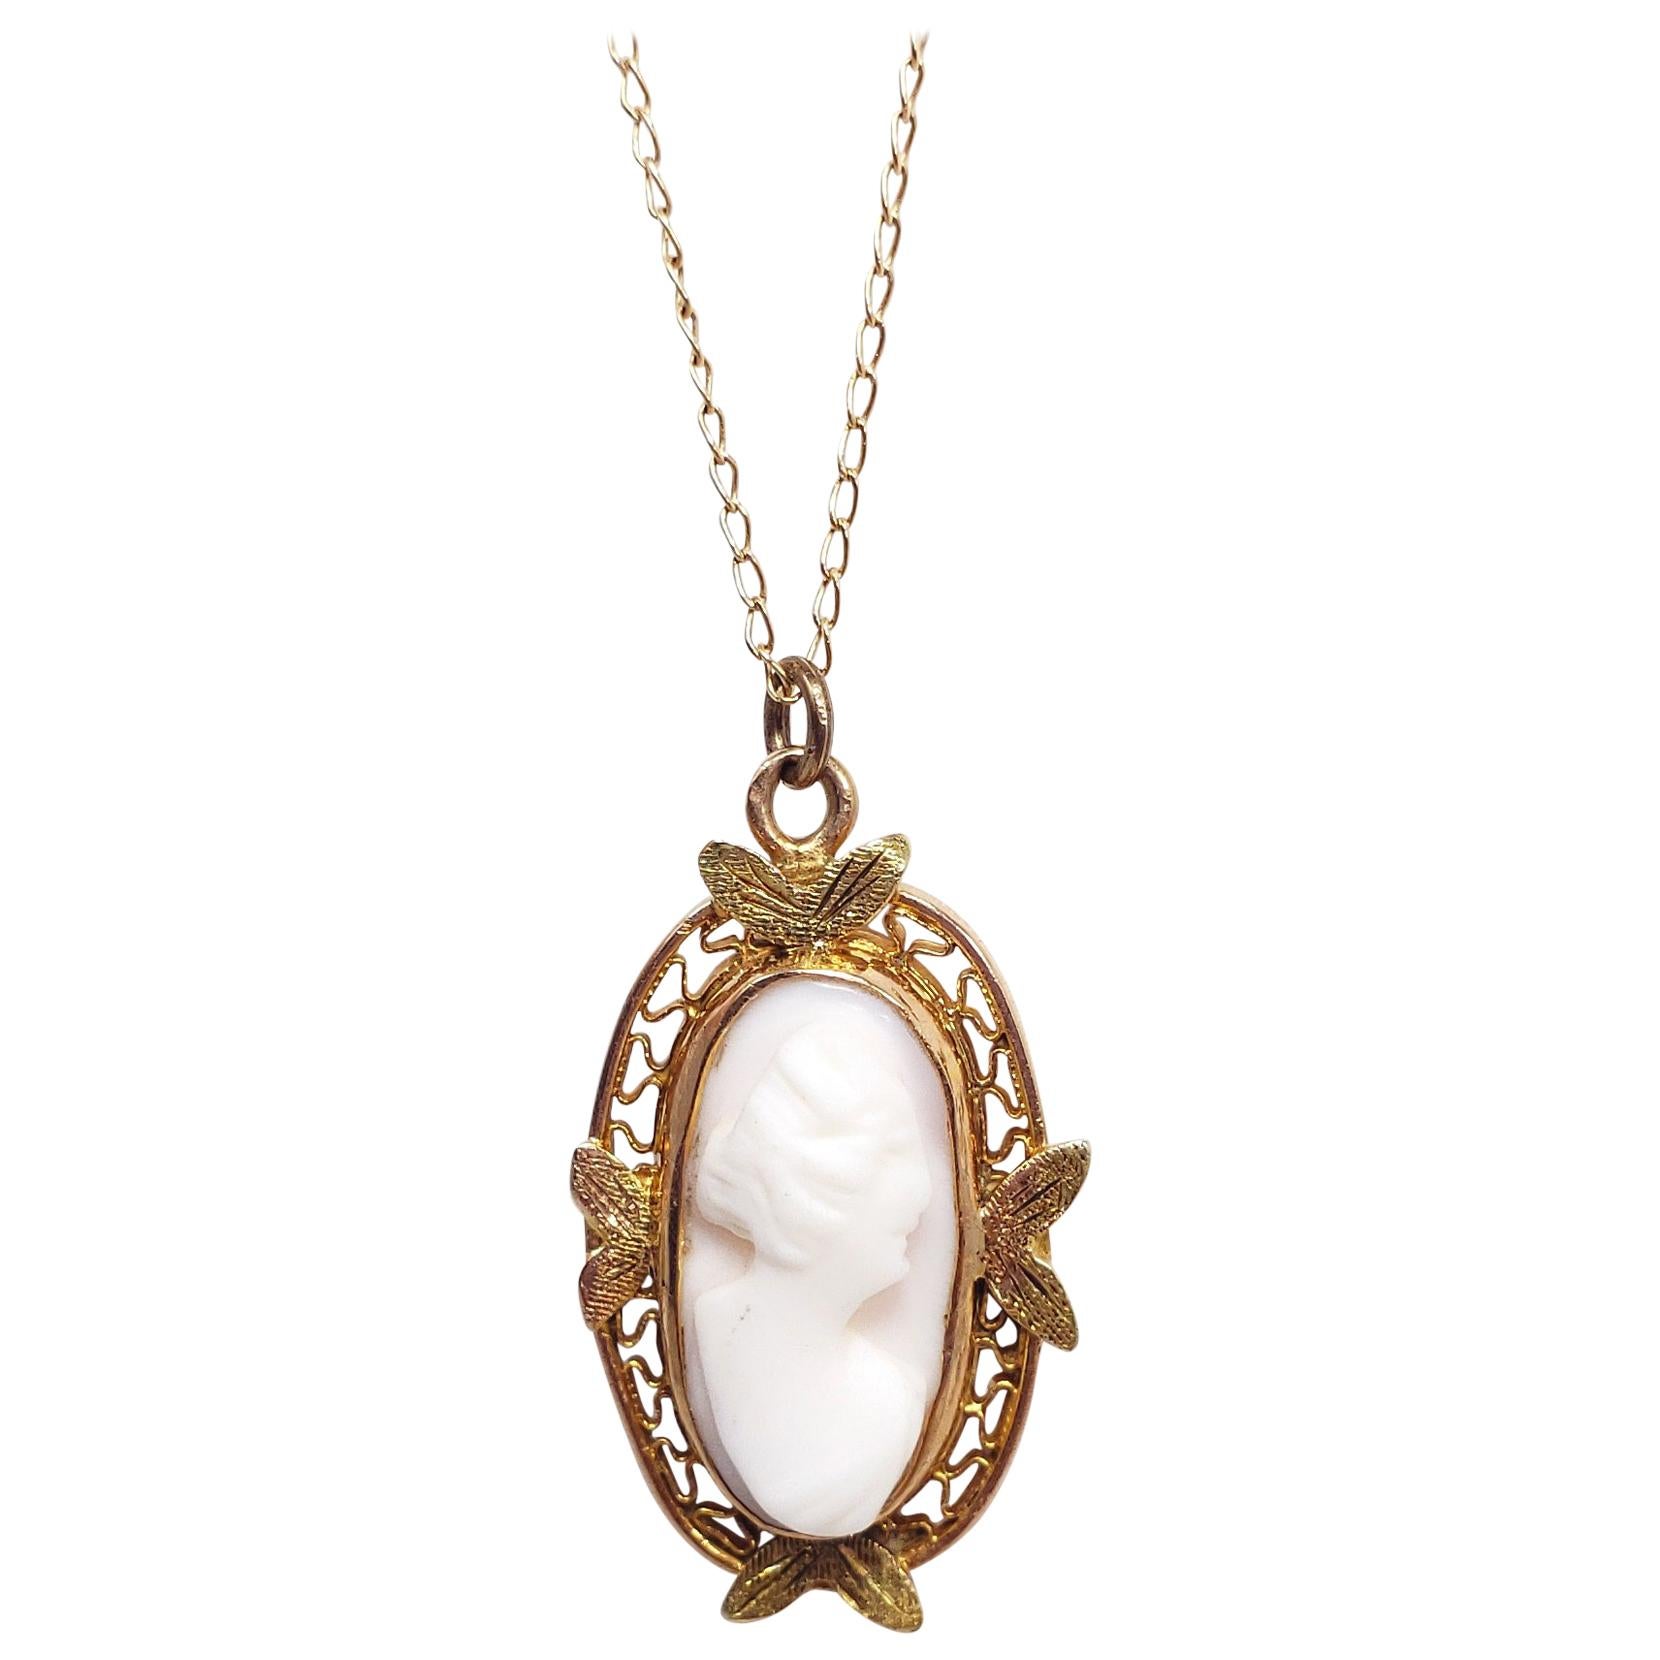 Carved Pink Shell Cameo Pendant Necklace, 10 Karat Gold, 1940s